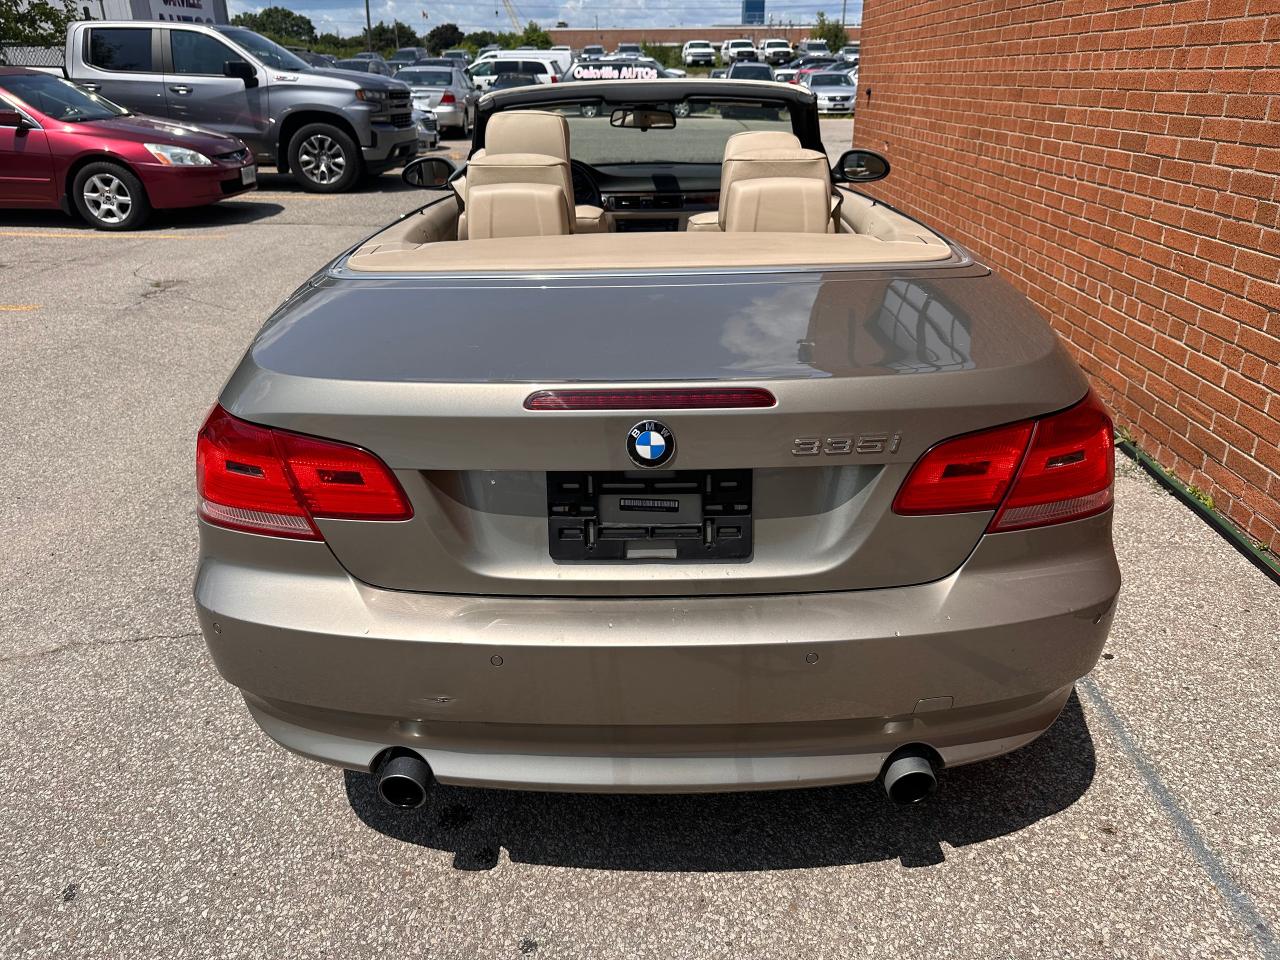 2007 BMW 3 Series 335i 2dr Cabriolet RWD, Certified - Photo #7